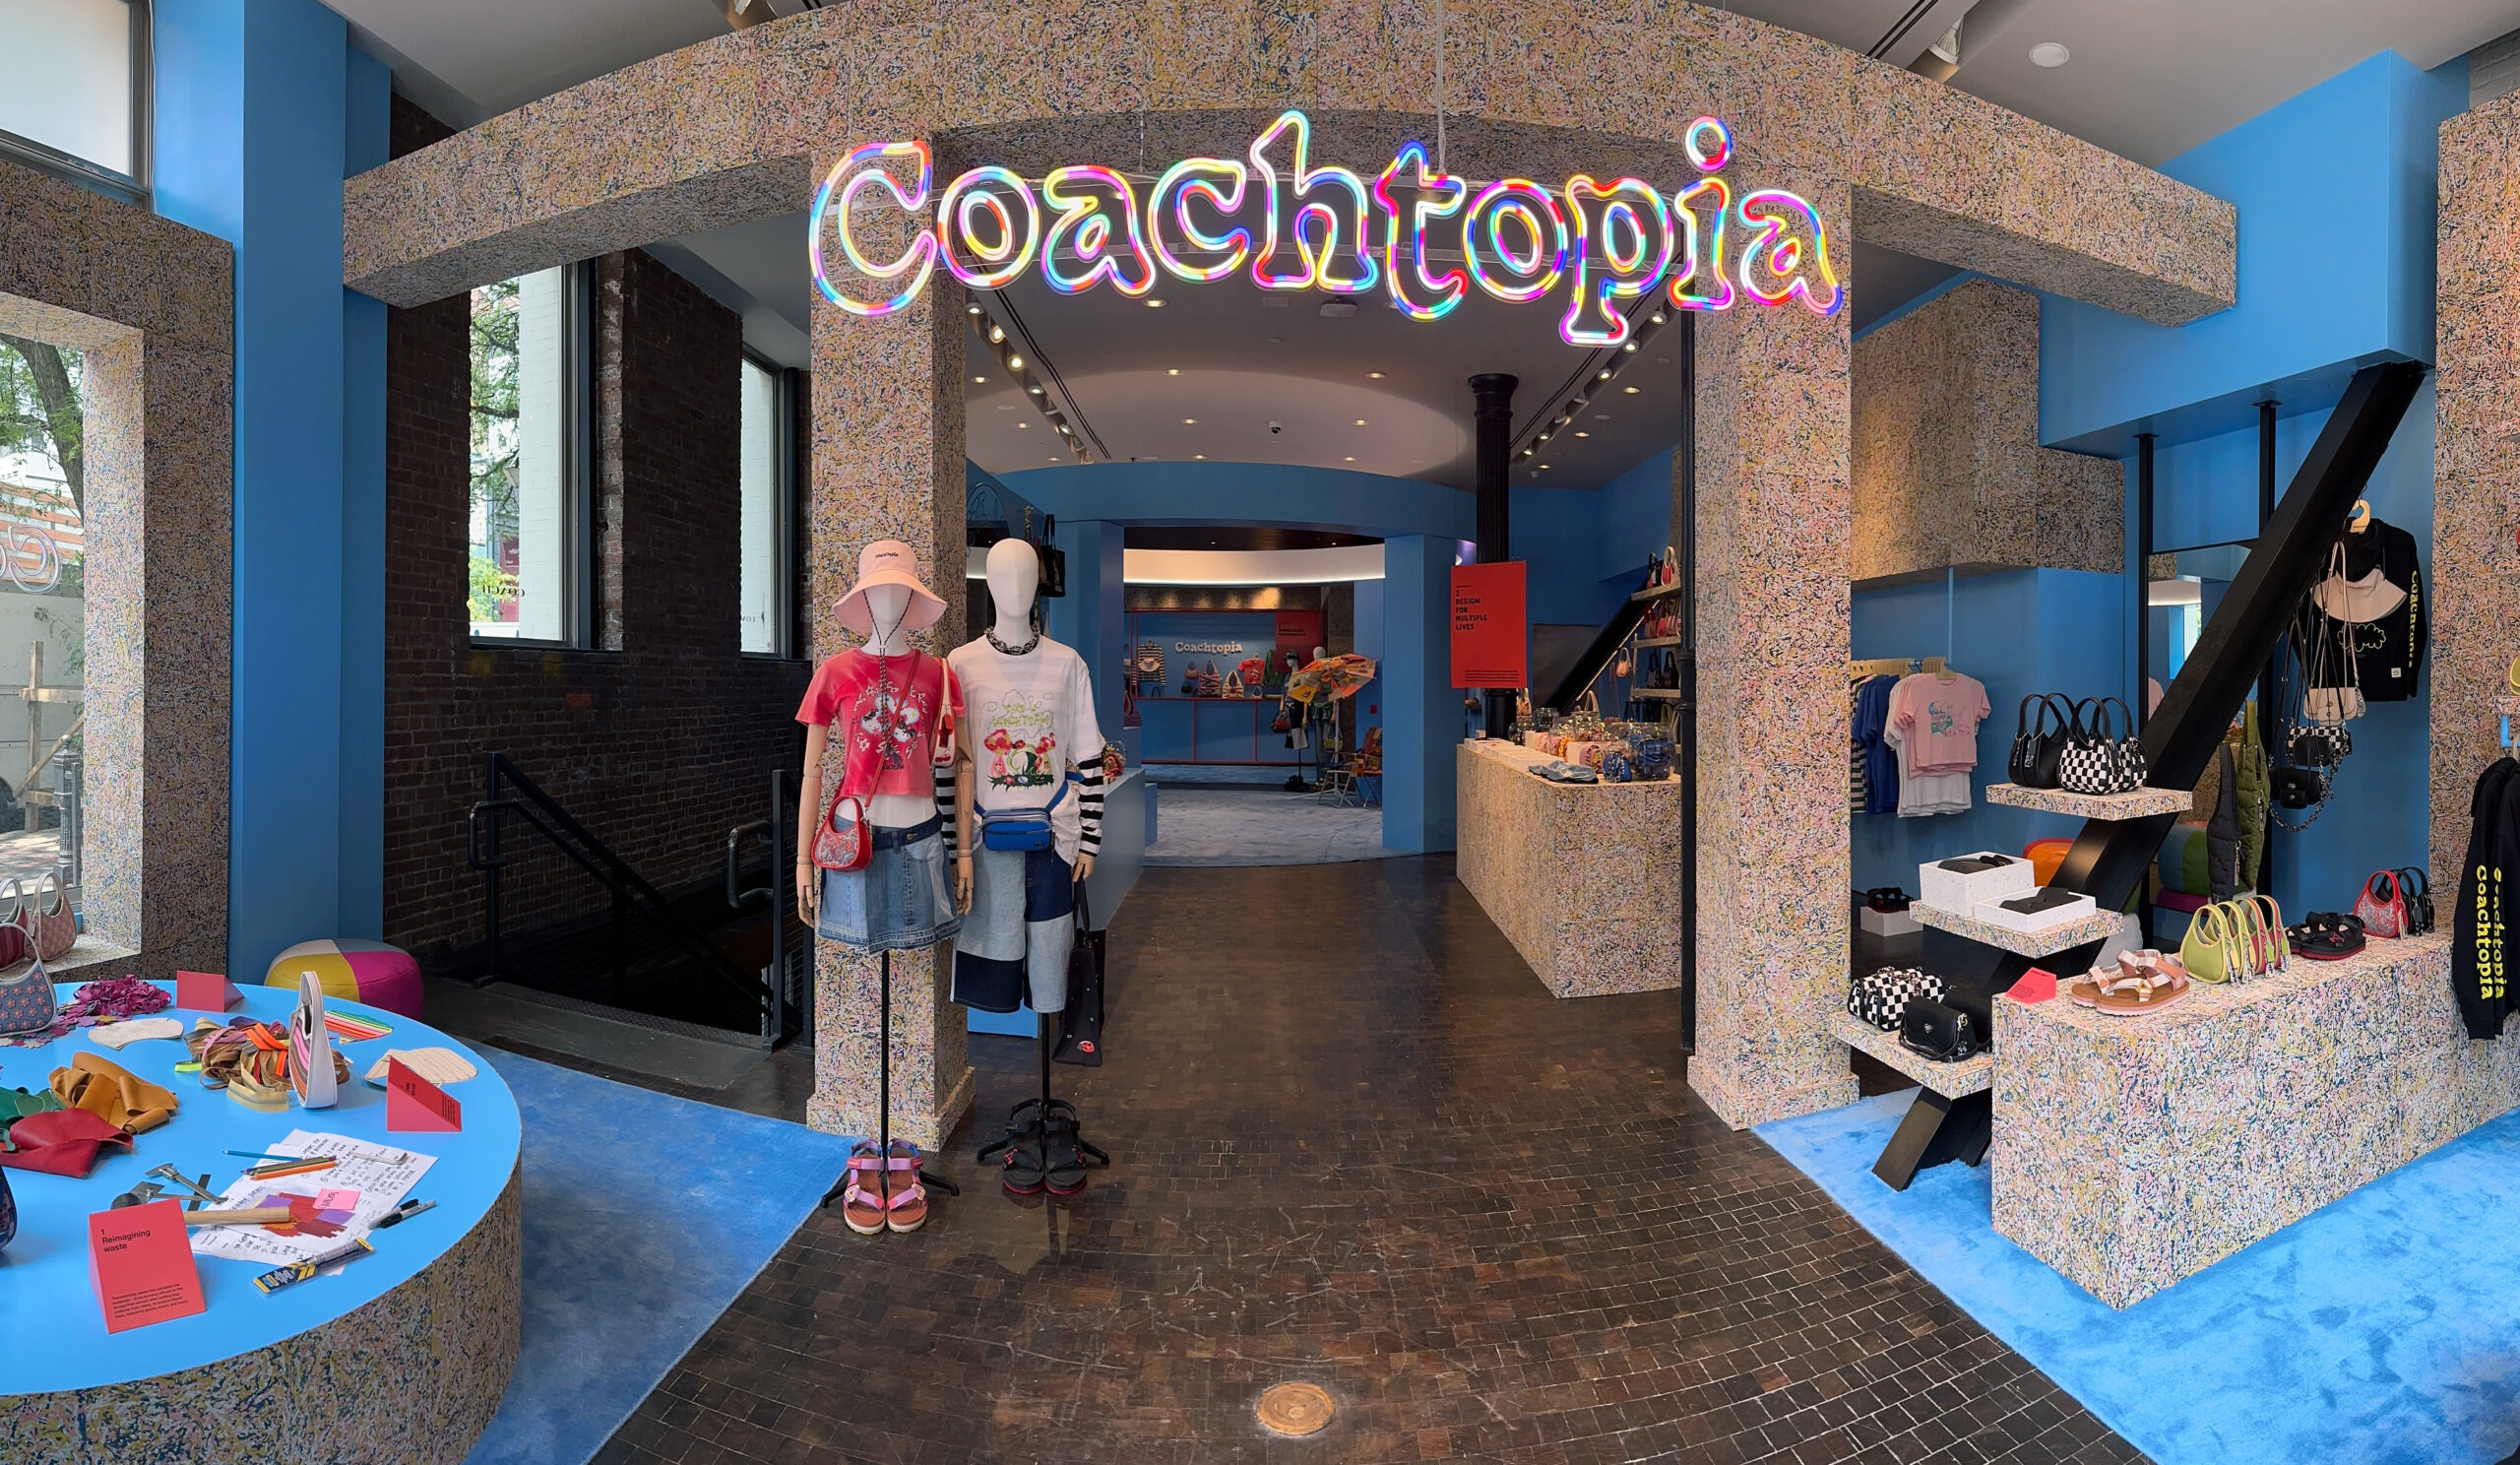 Most Interesting Pop-up Stores by Luxury Brands